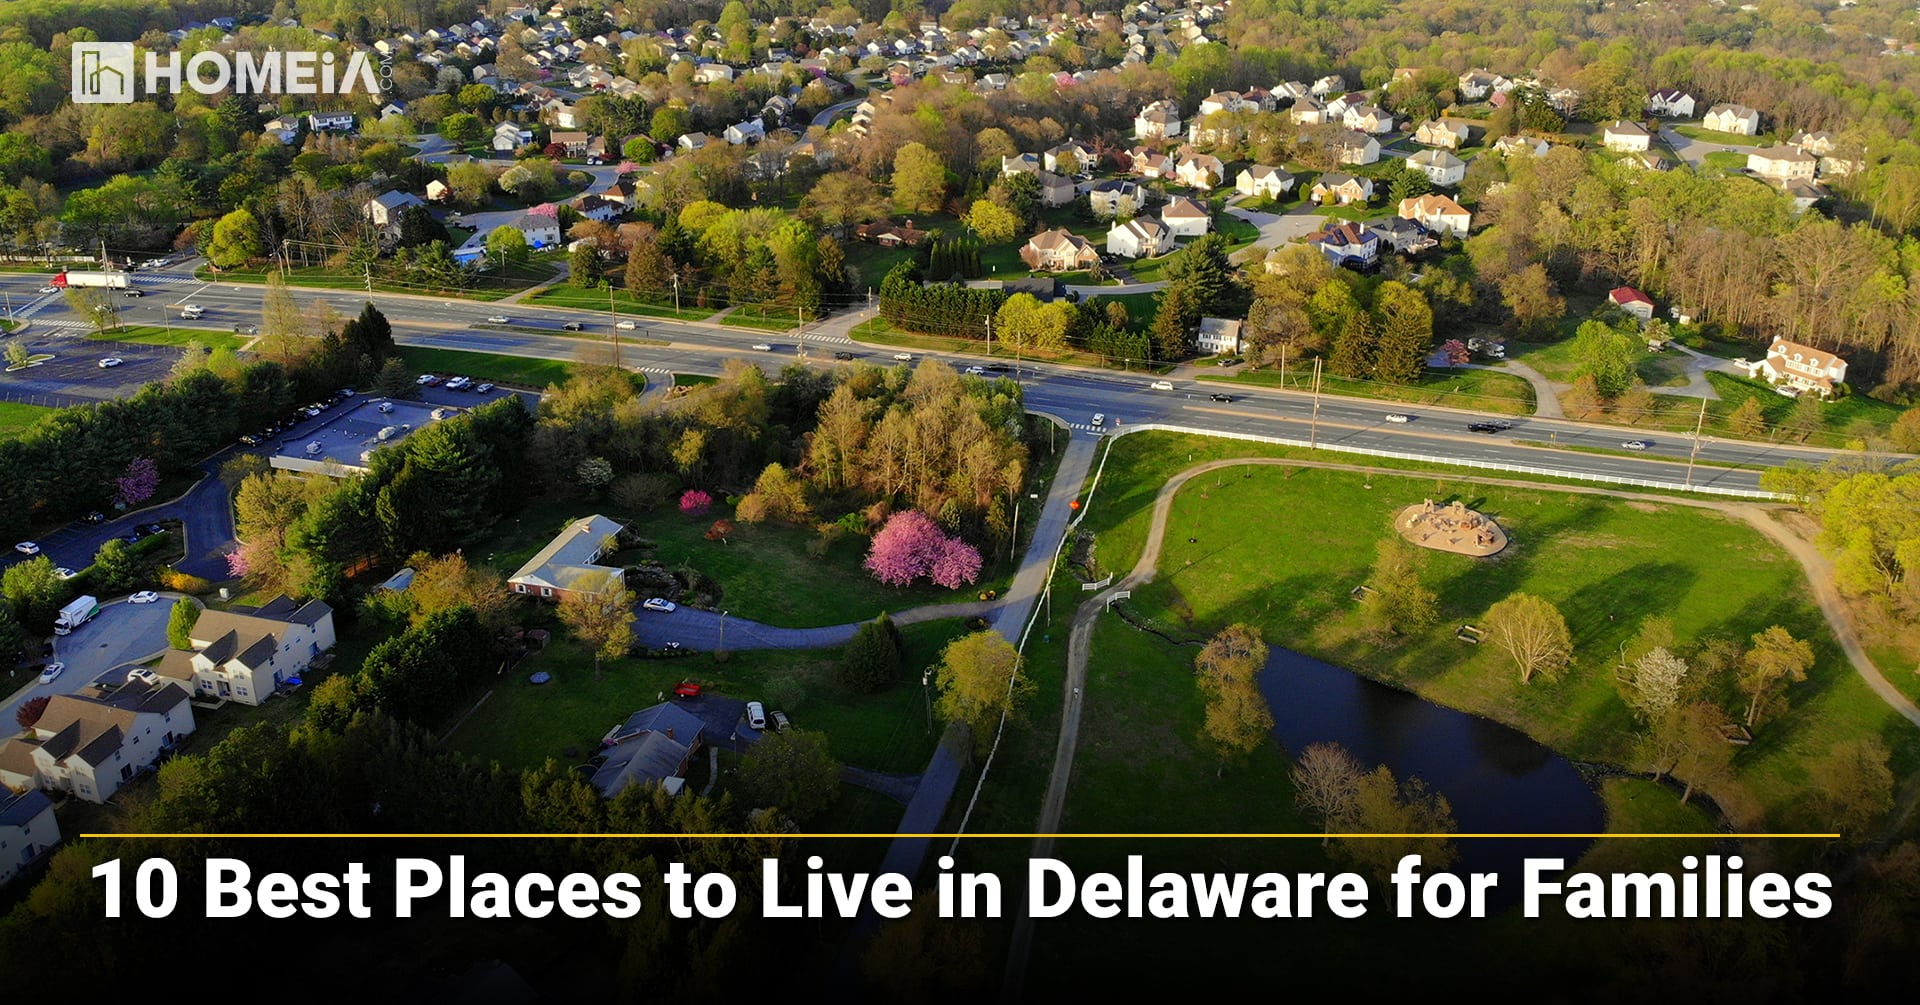 10 Best Places to Live in Delaware for Families